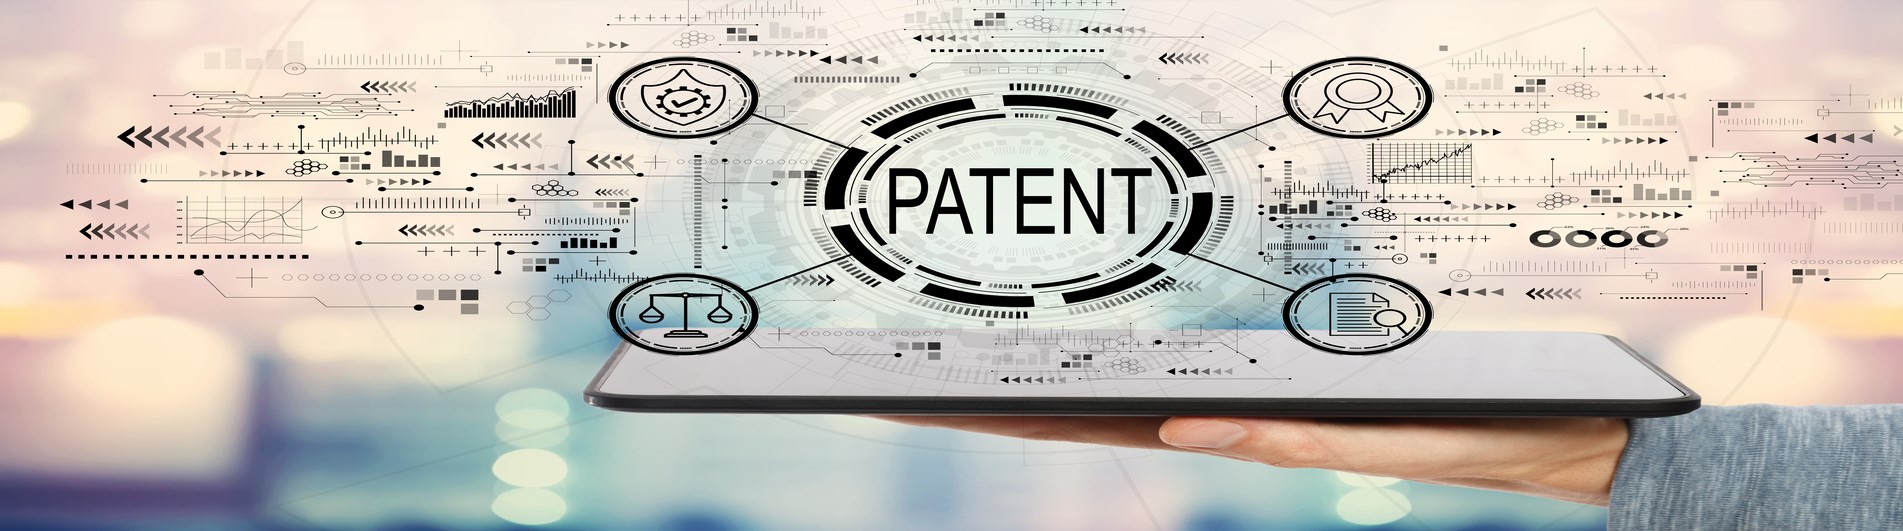 Patent Due diligence